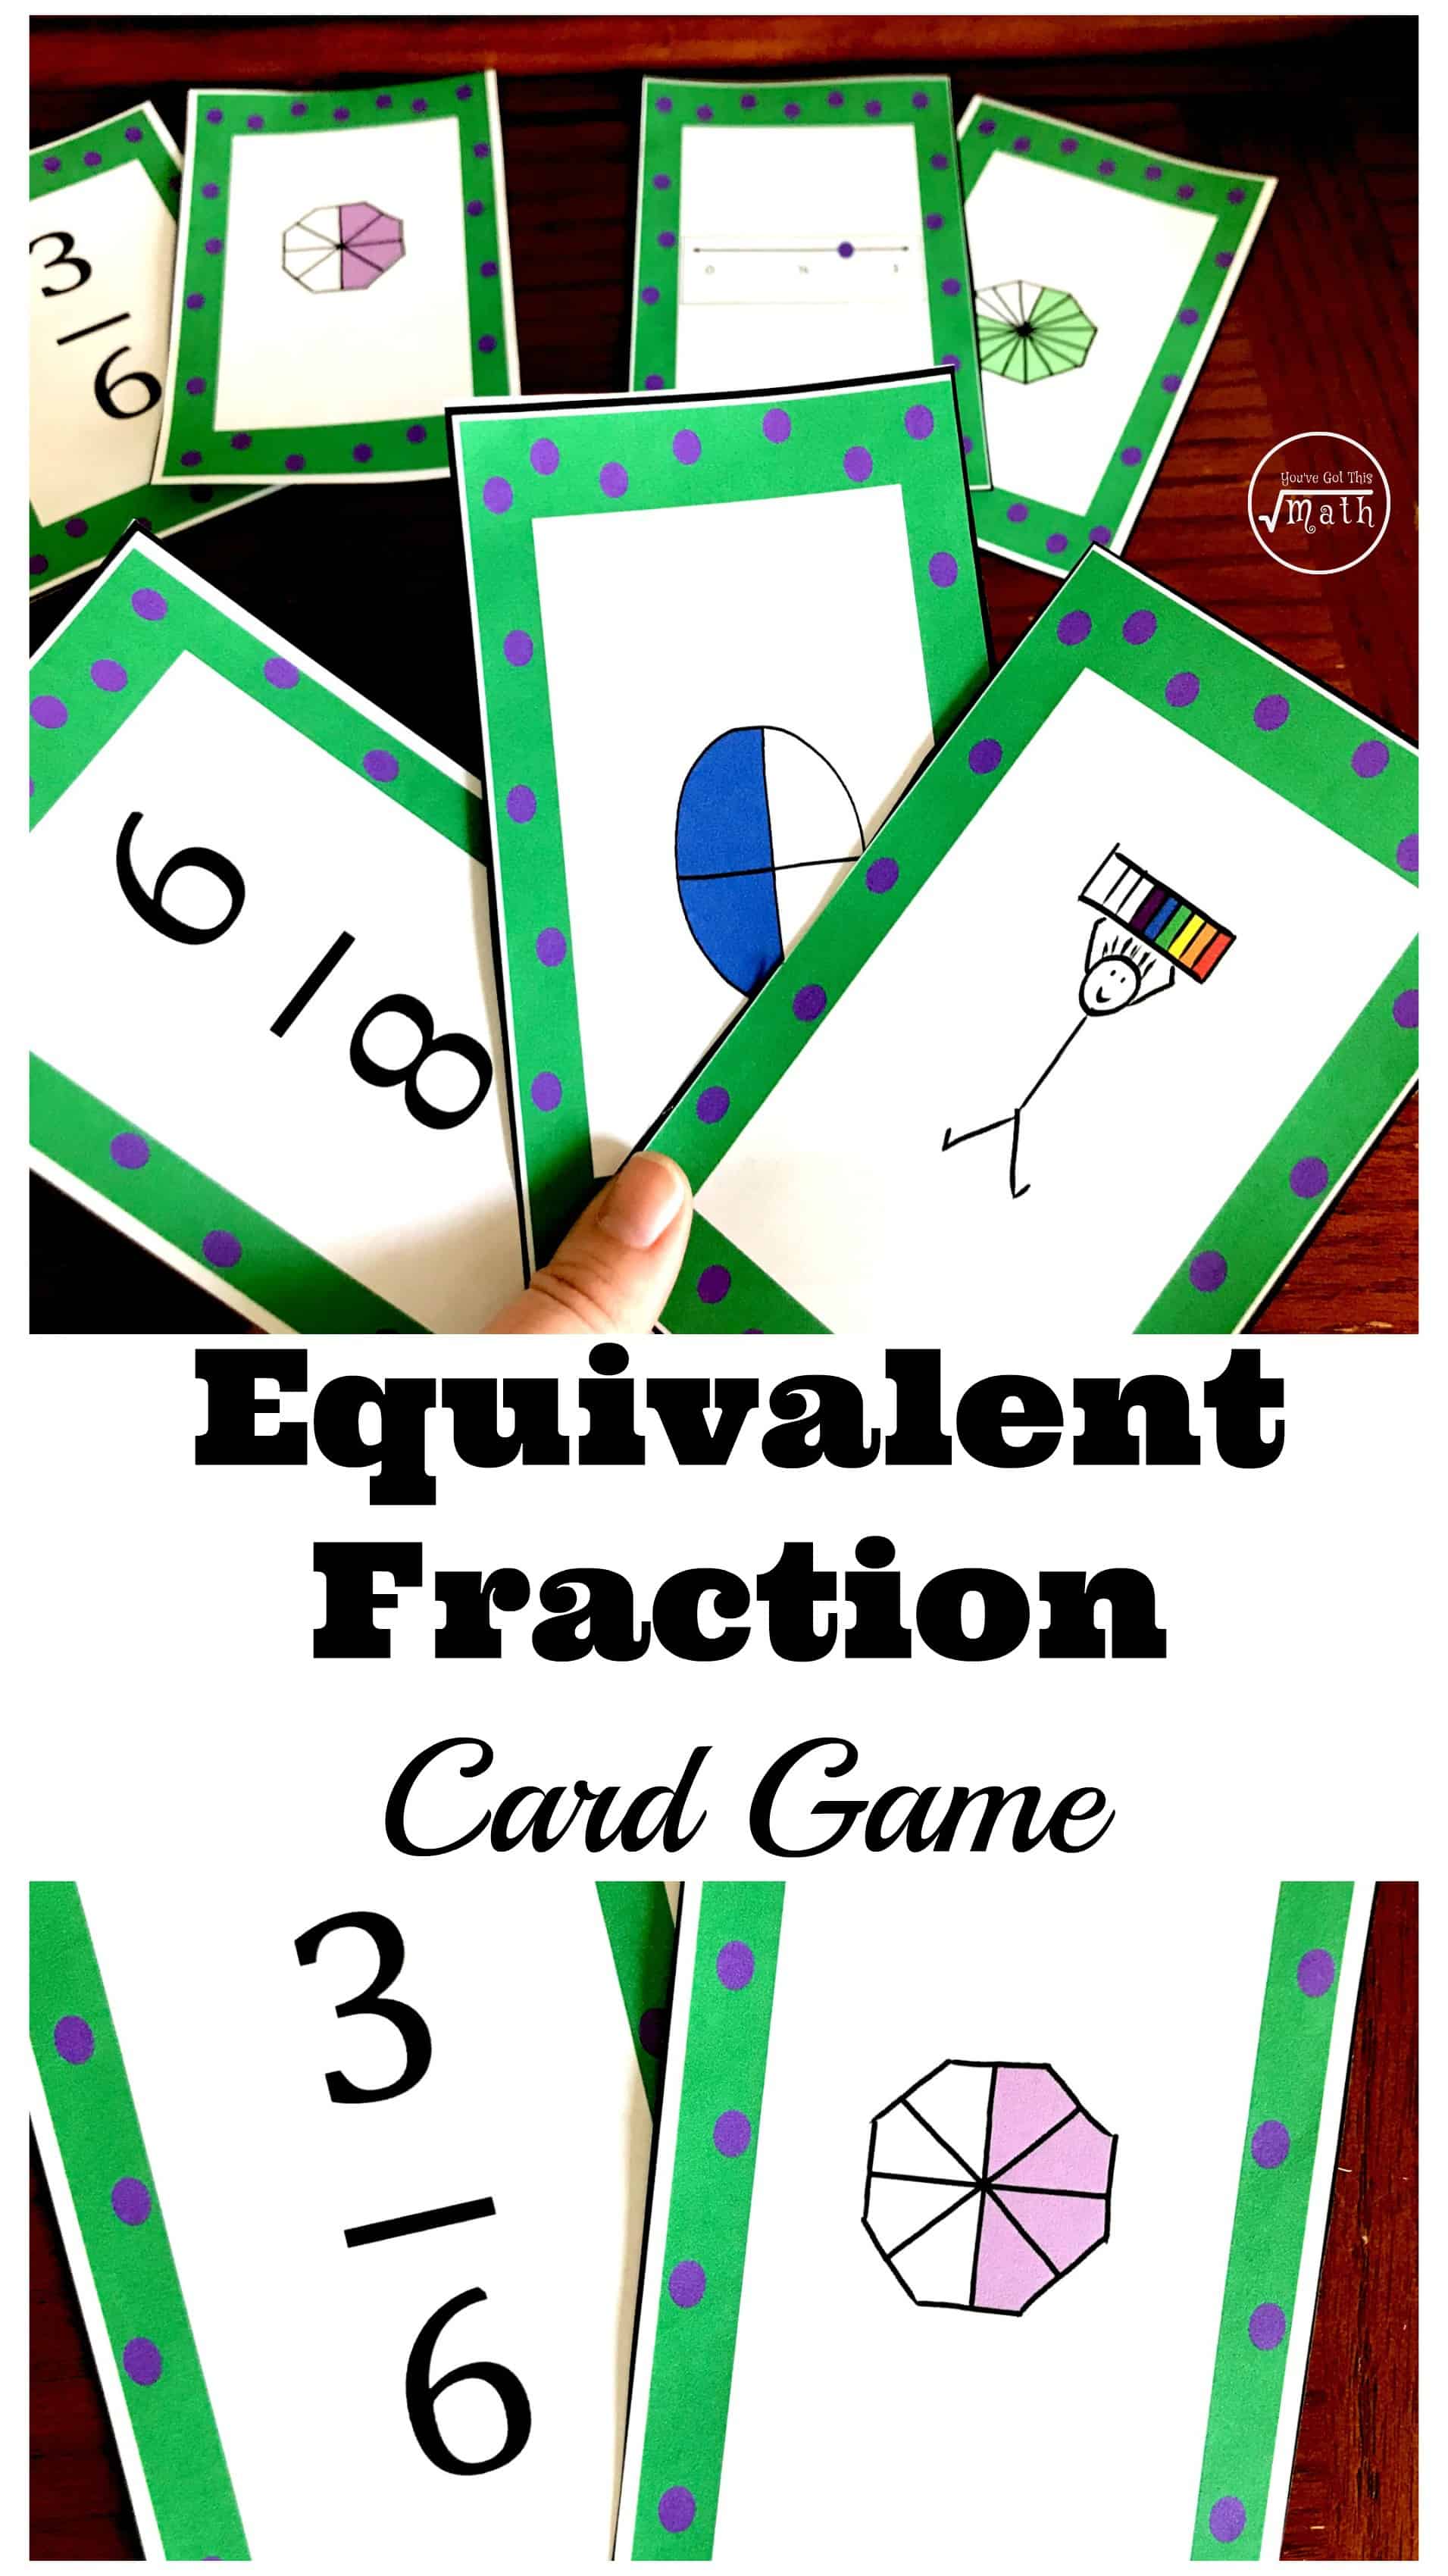 Equivalent fractions cards on a table. 